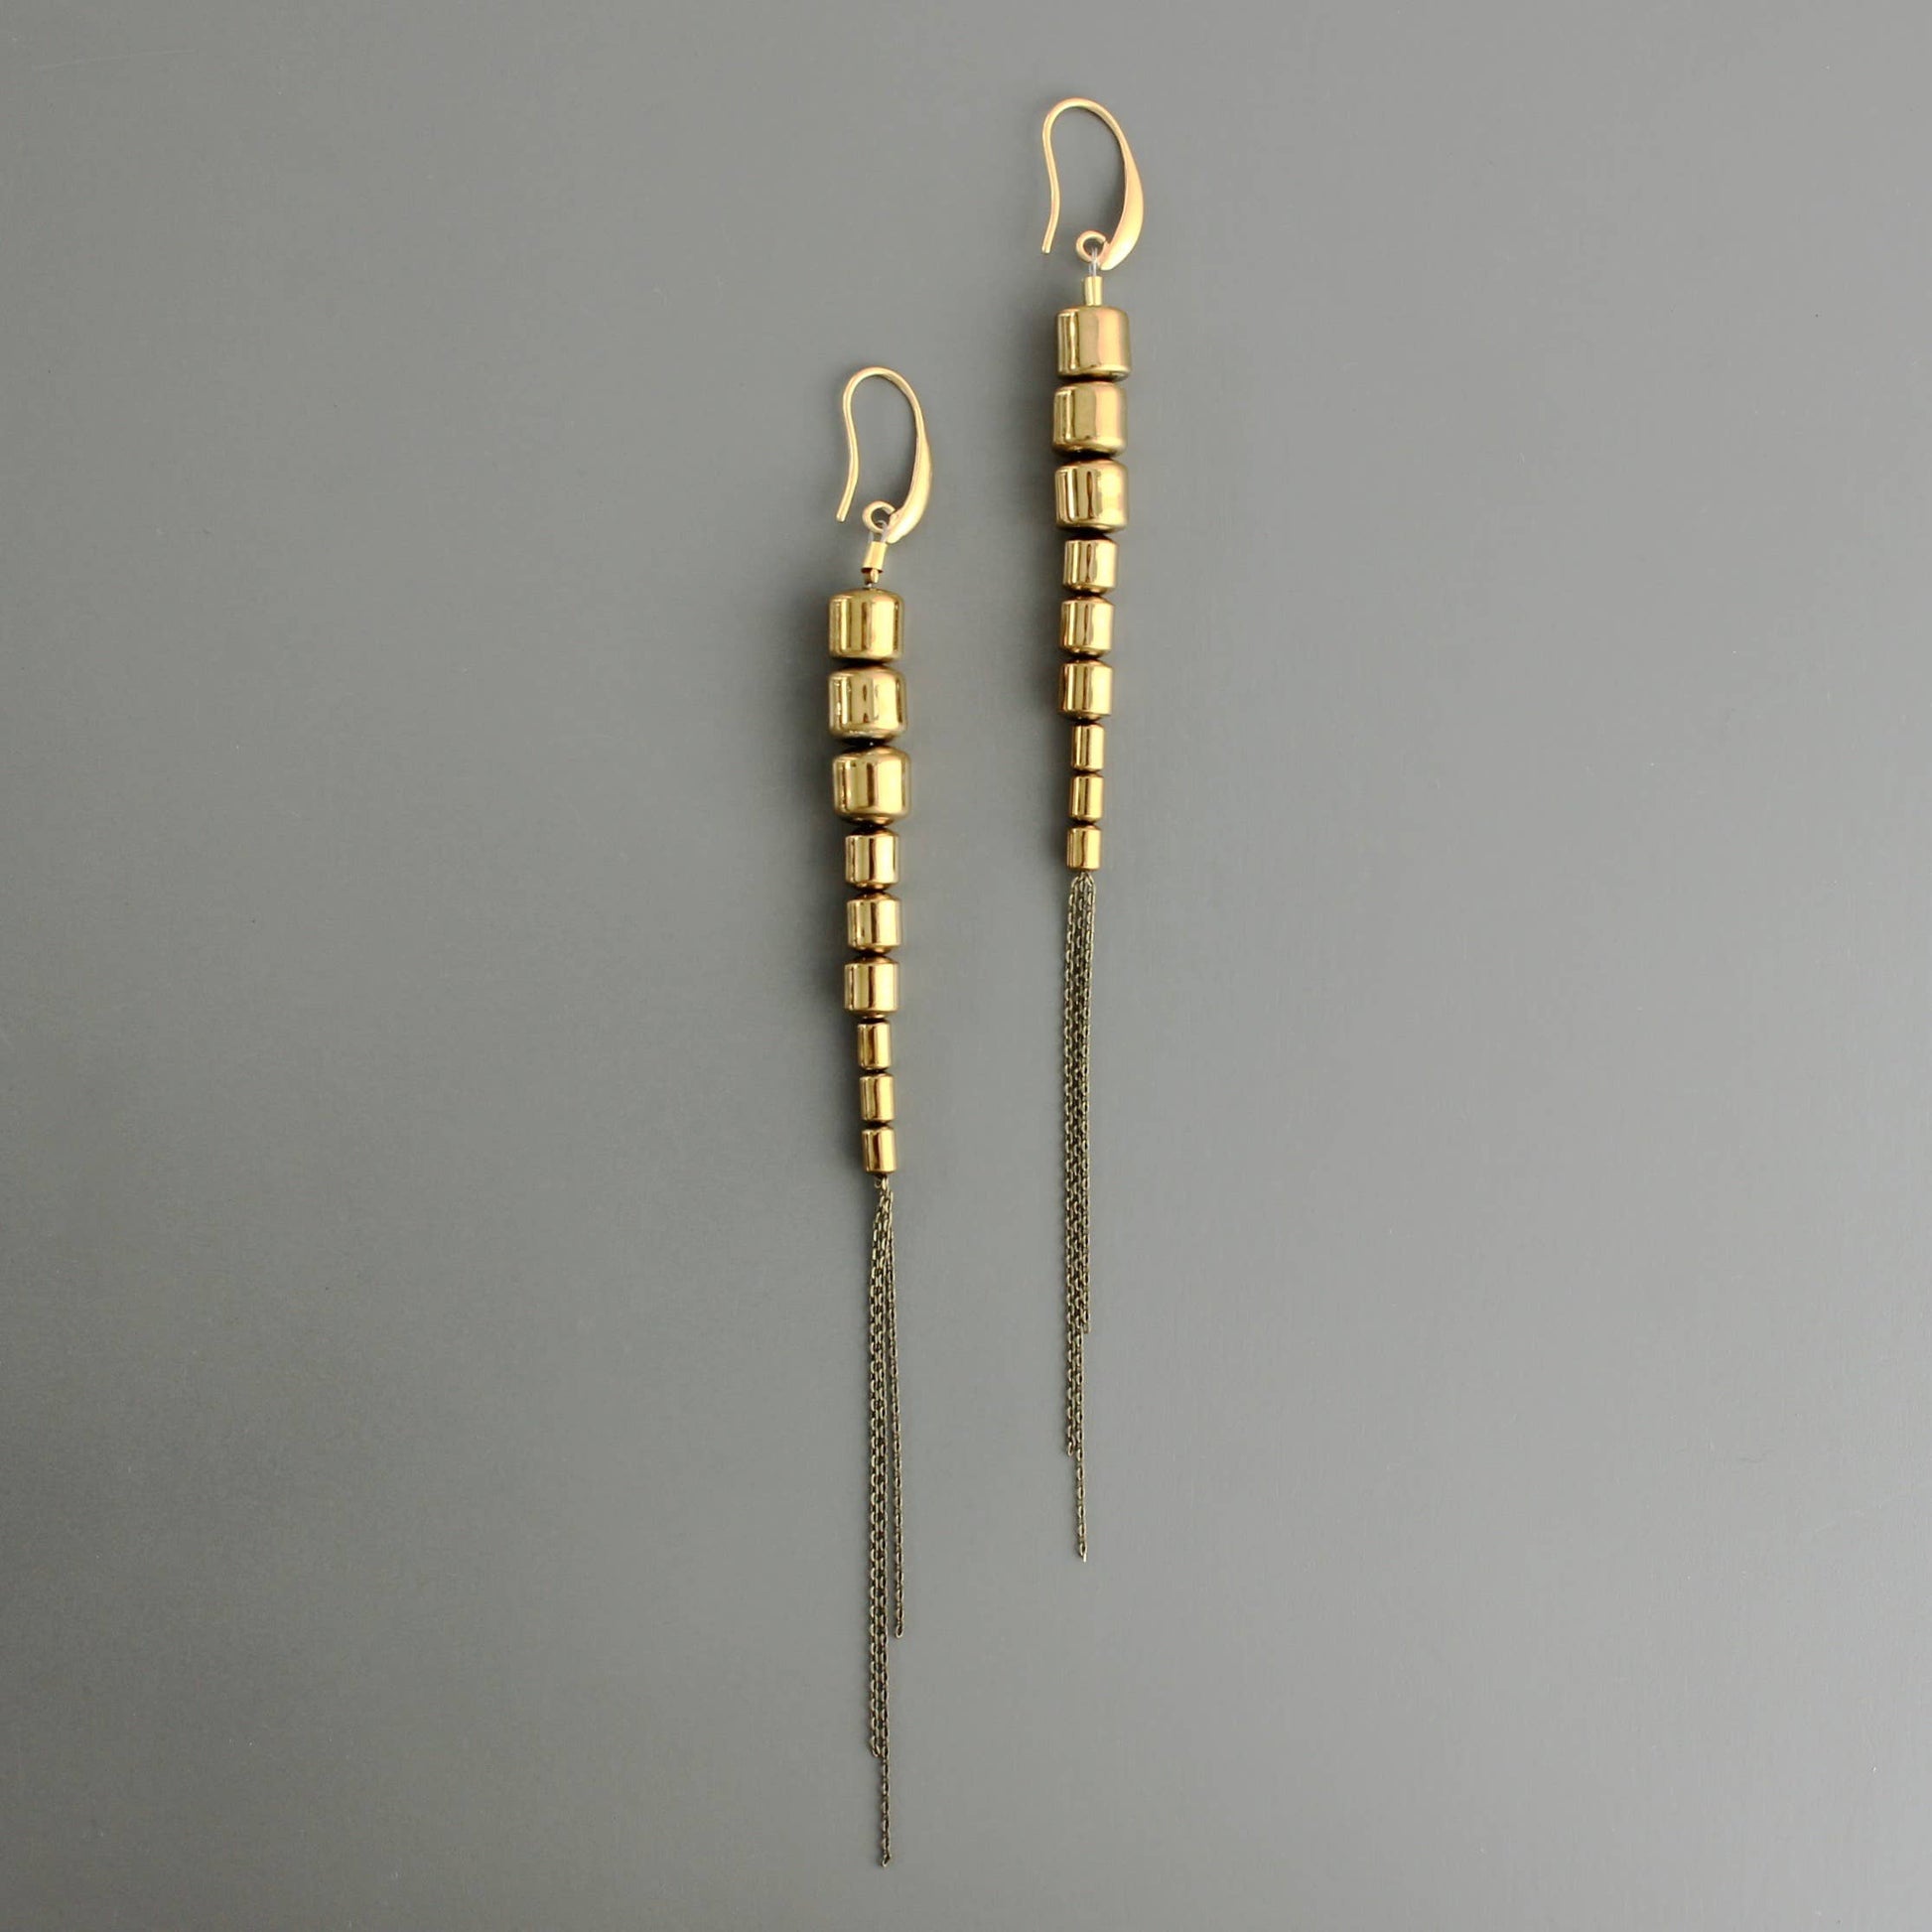 Super long shiny earrings are a 70s Studio 54 vibe. 18k gold plated brass hooks with 9  plated hematite beads and brass chain. 6.5 inches from top of hook to bottom of chain. Against a grey background